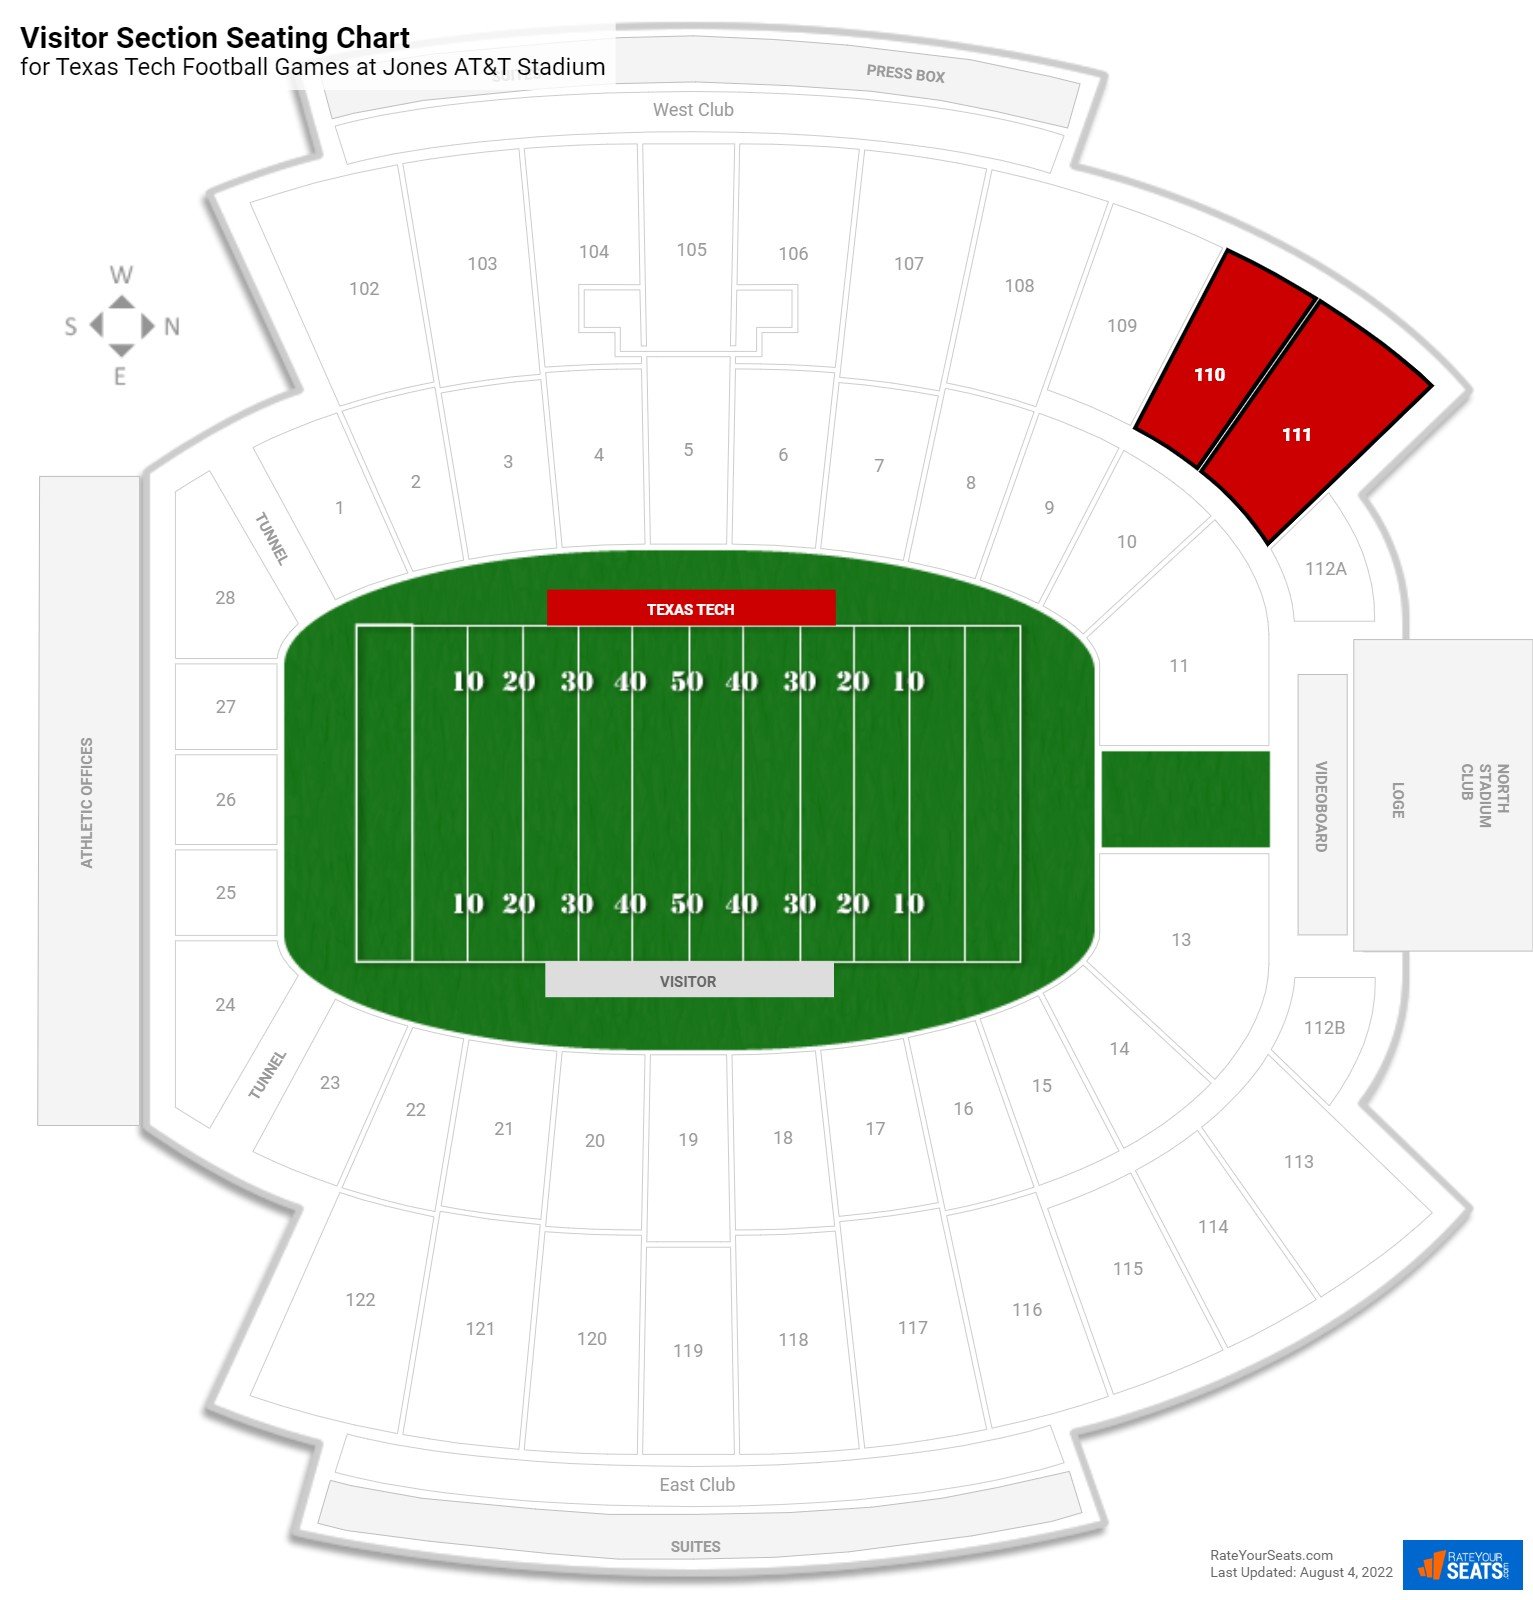 Texas Tech Visitor Section Seating Chart at Jones AT&T Stadium